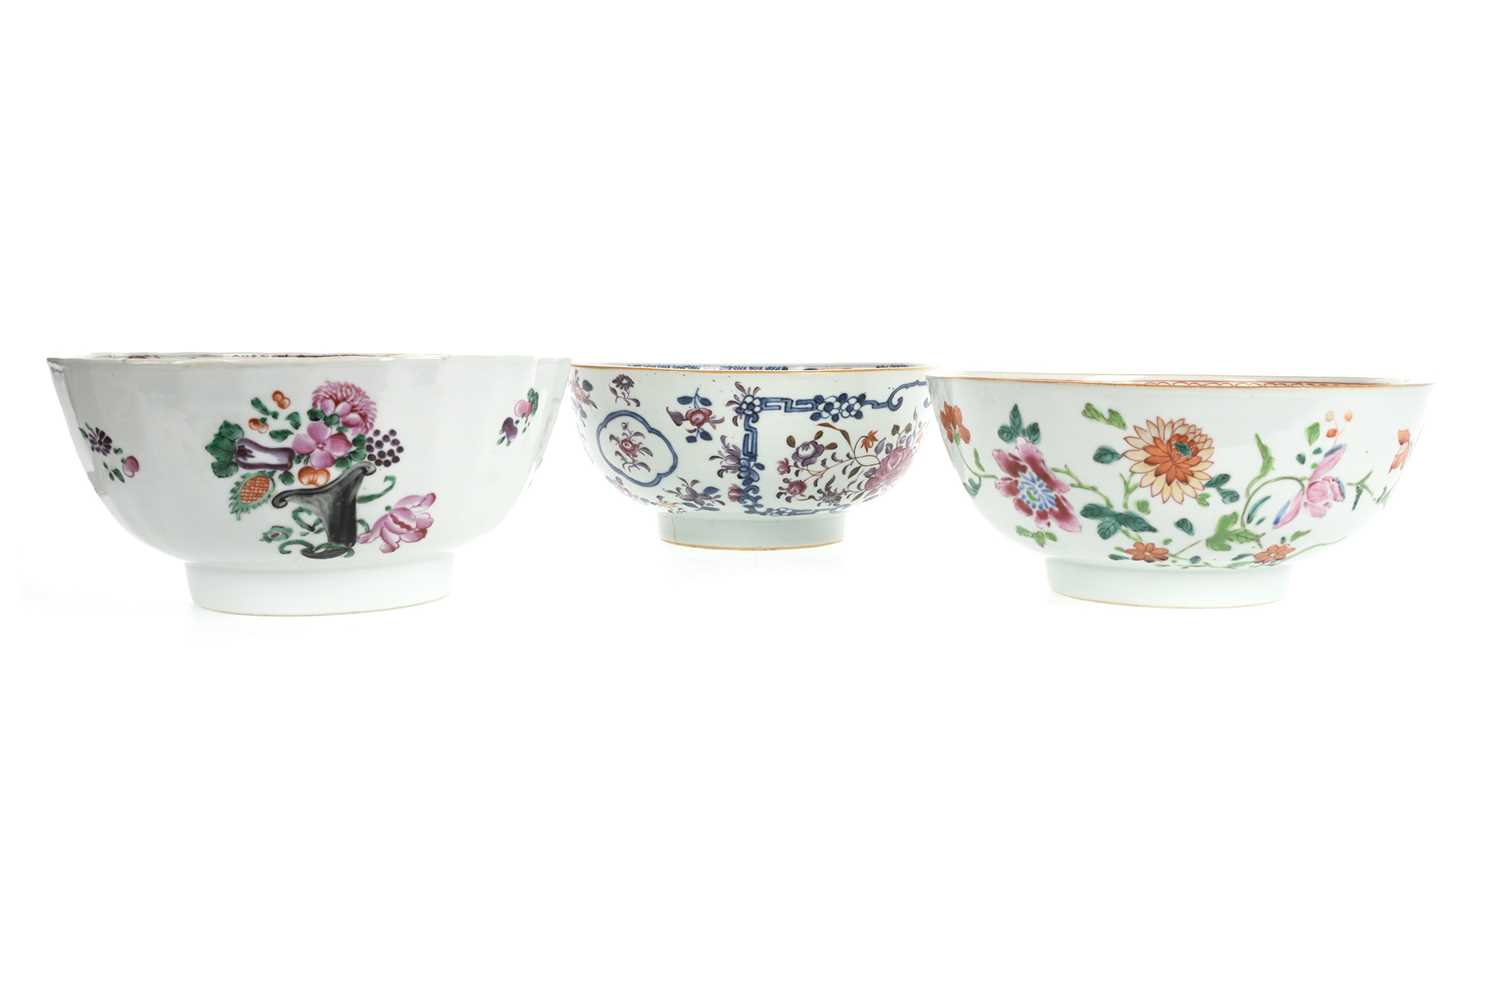 GROUP OF 18TH CENTURY CHINESE FAMILLE ROSE BOWLS, QIANLONG PERIOD (1736 - 1795)